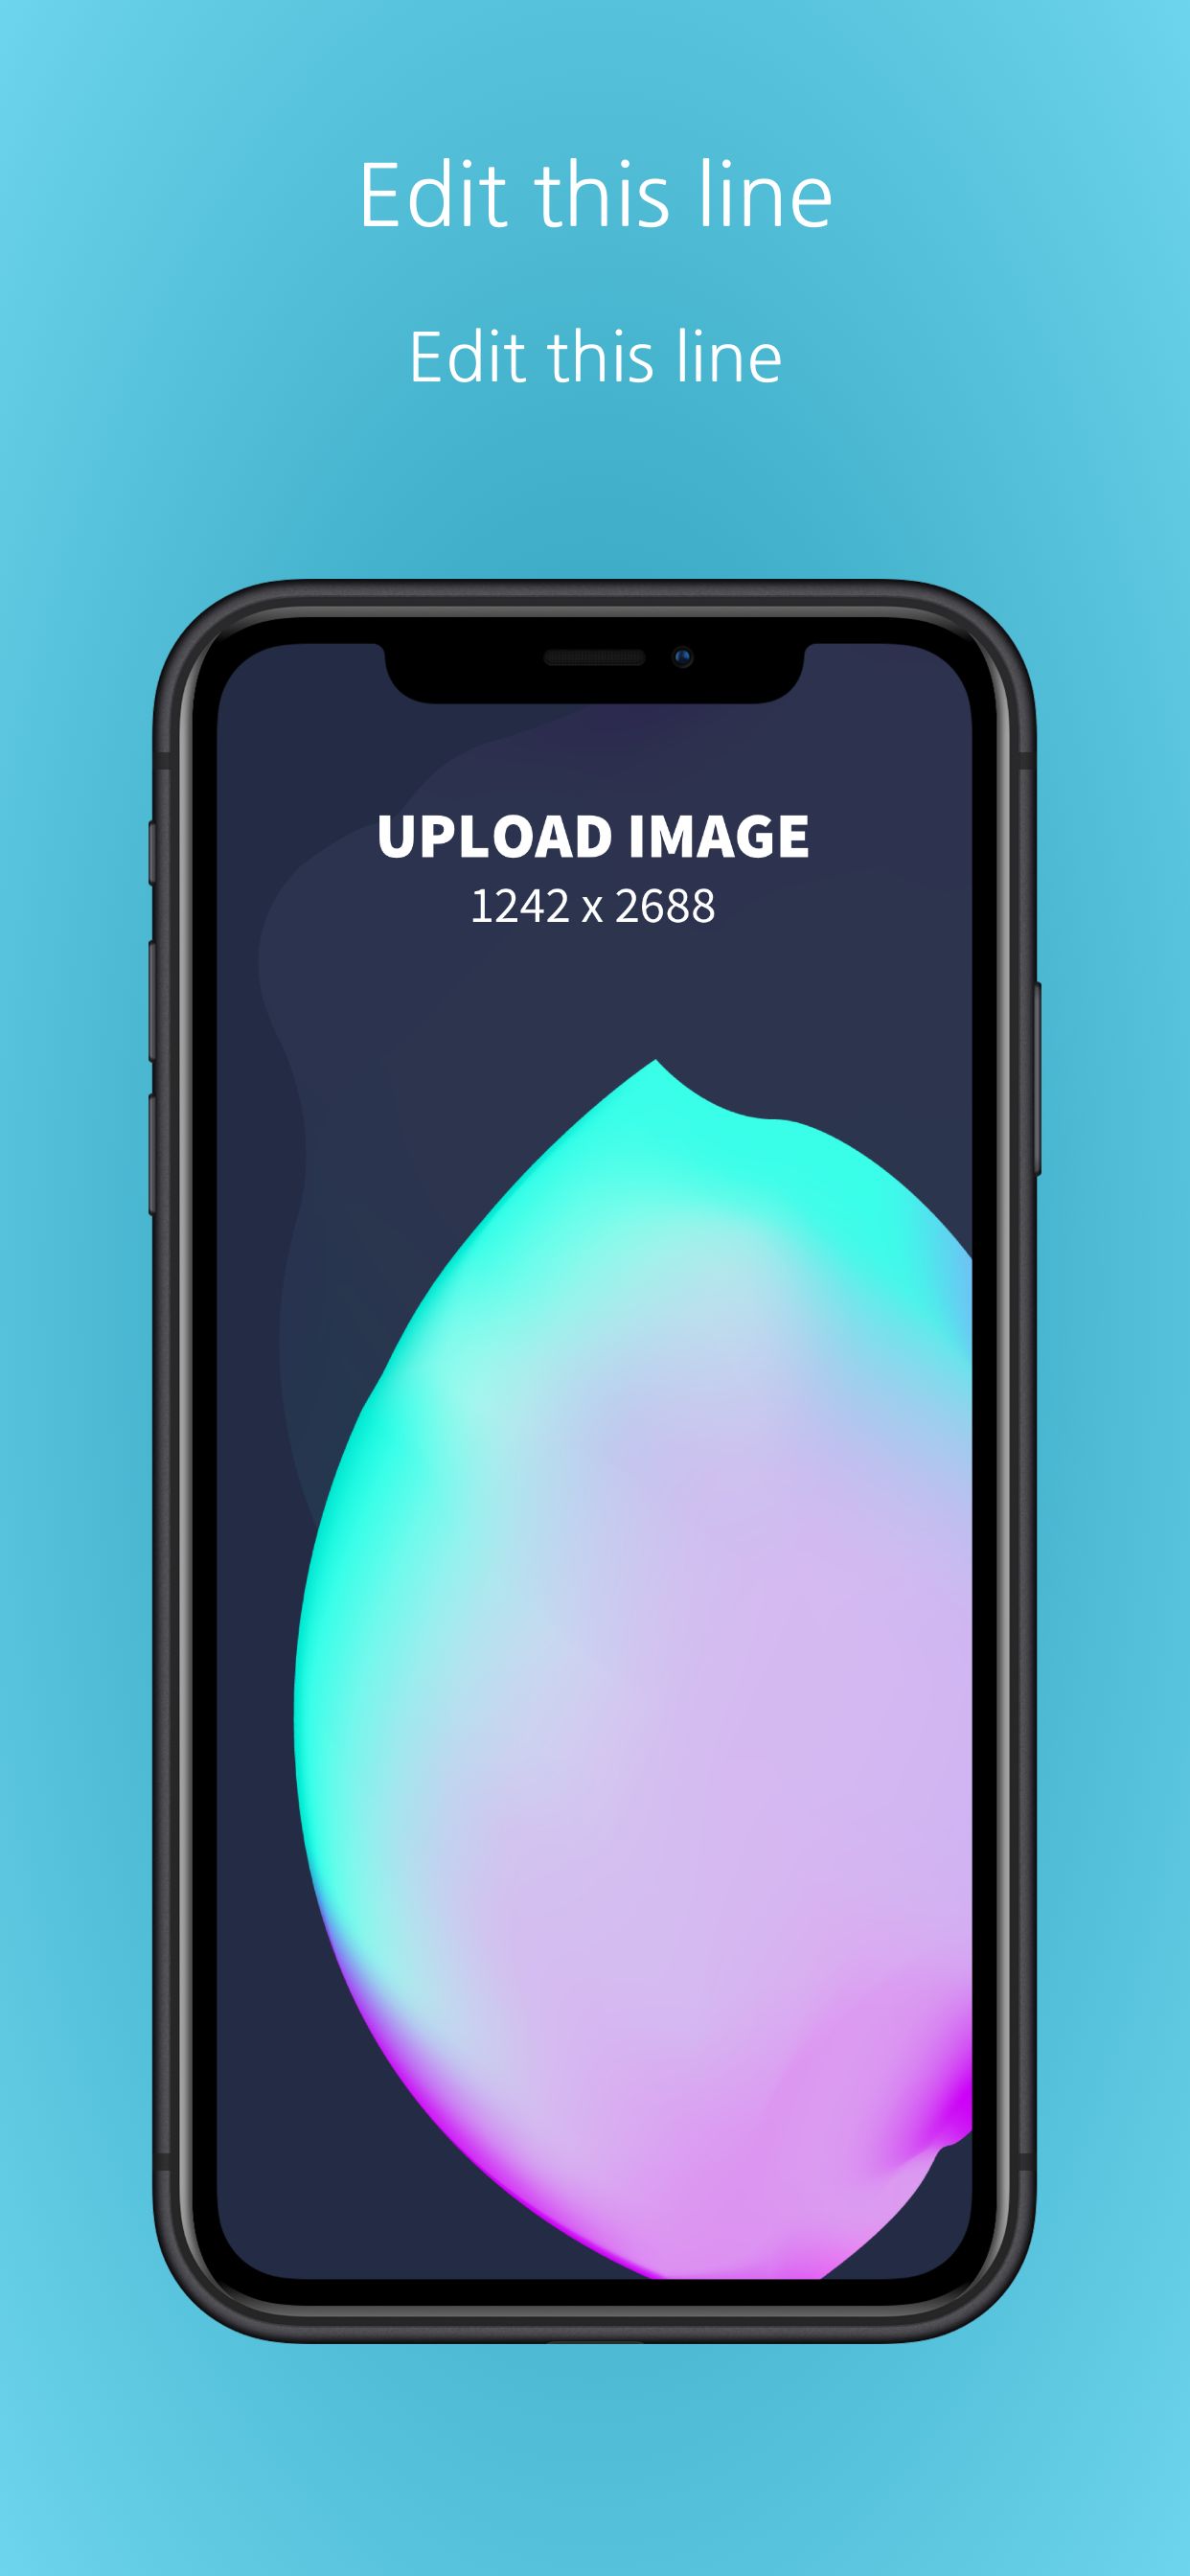 iPhone XS Max Screenshot 3 template. Quickly edit text, colors, images, and more for free.